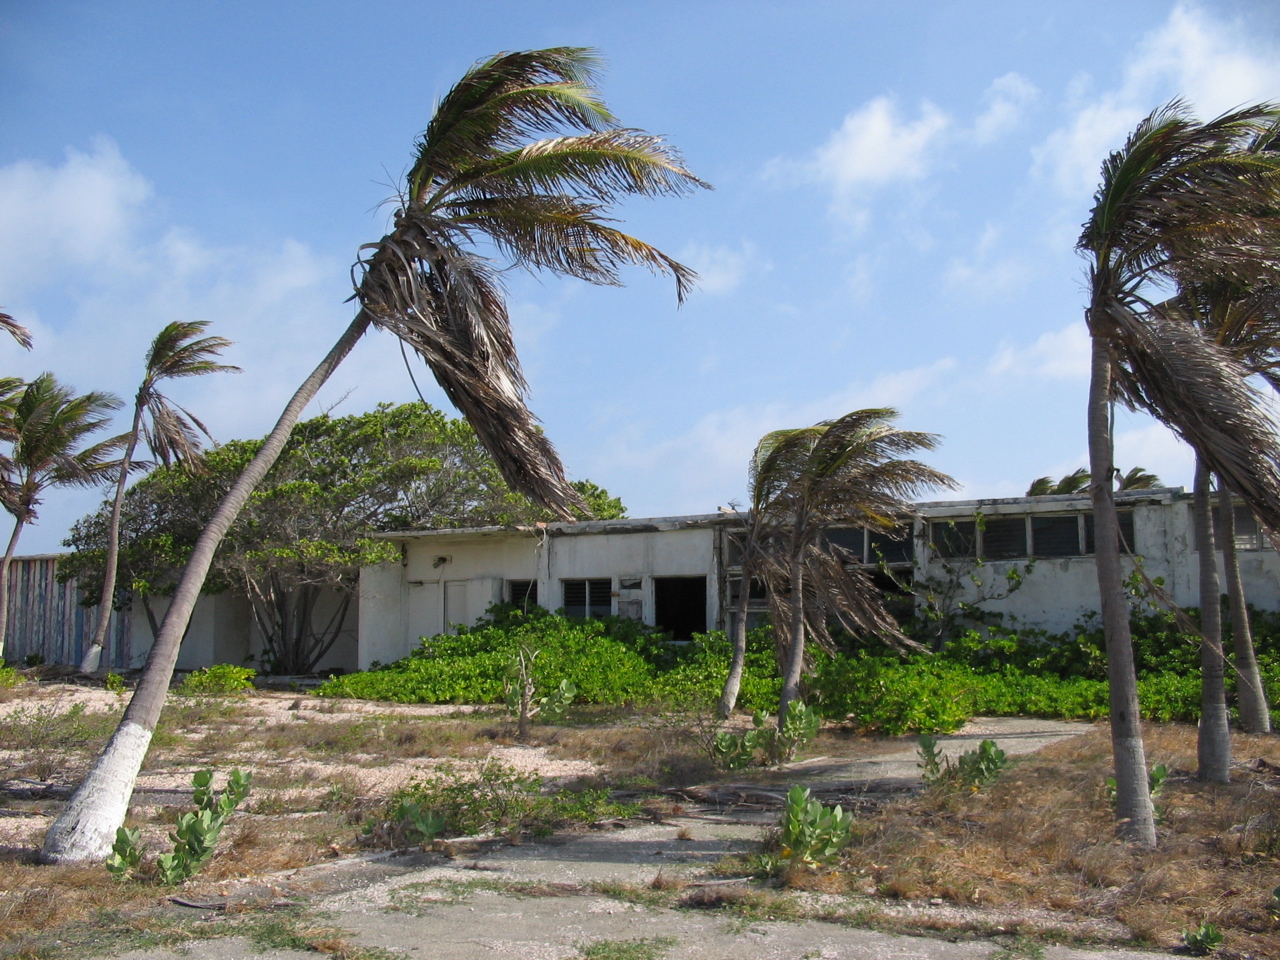 Abandoned school at the old Esso refinery near Baby Beach